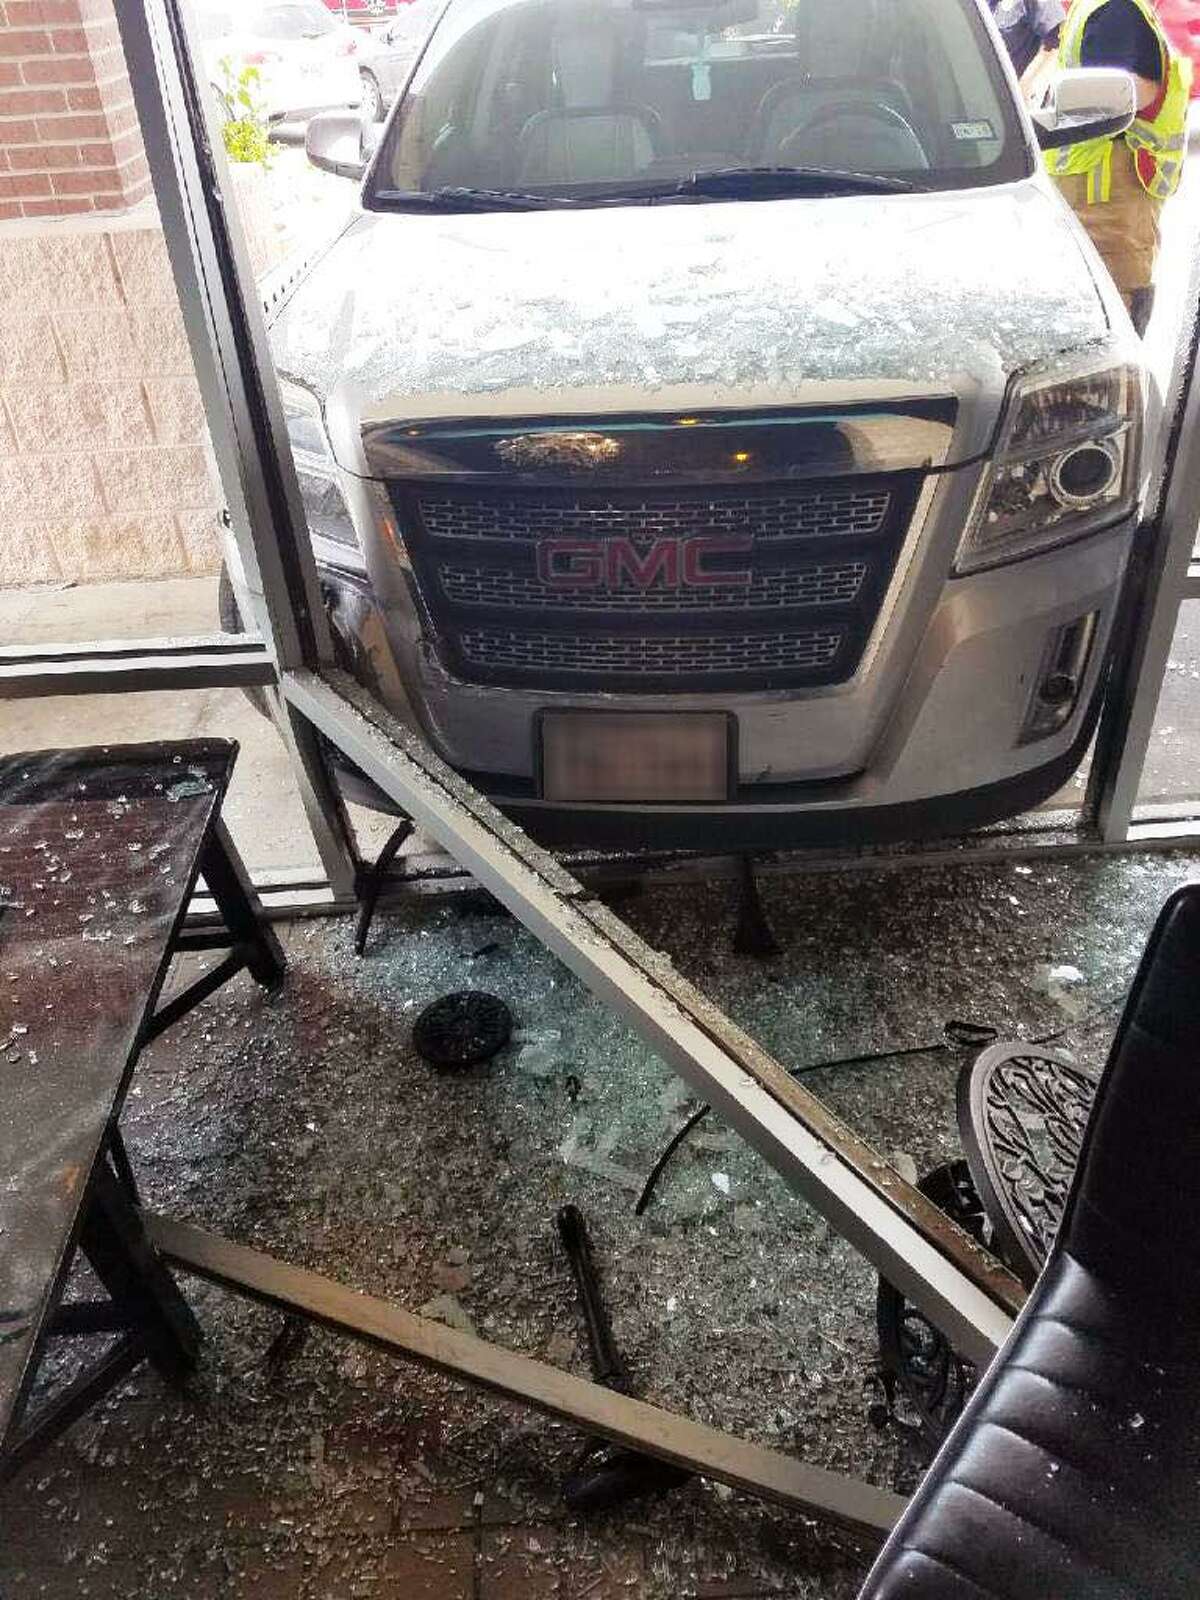 A car smashed through a window at Nectar Cafe in Atascocita on July 22, 2018. A mother was teaching her son how to drive. No one was injured.